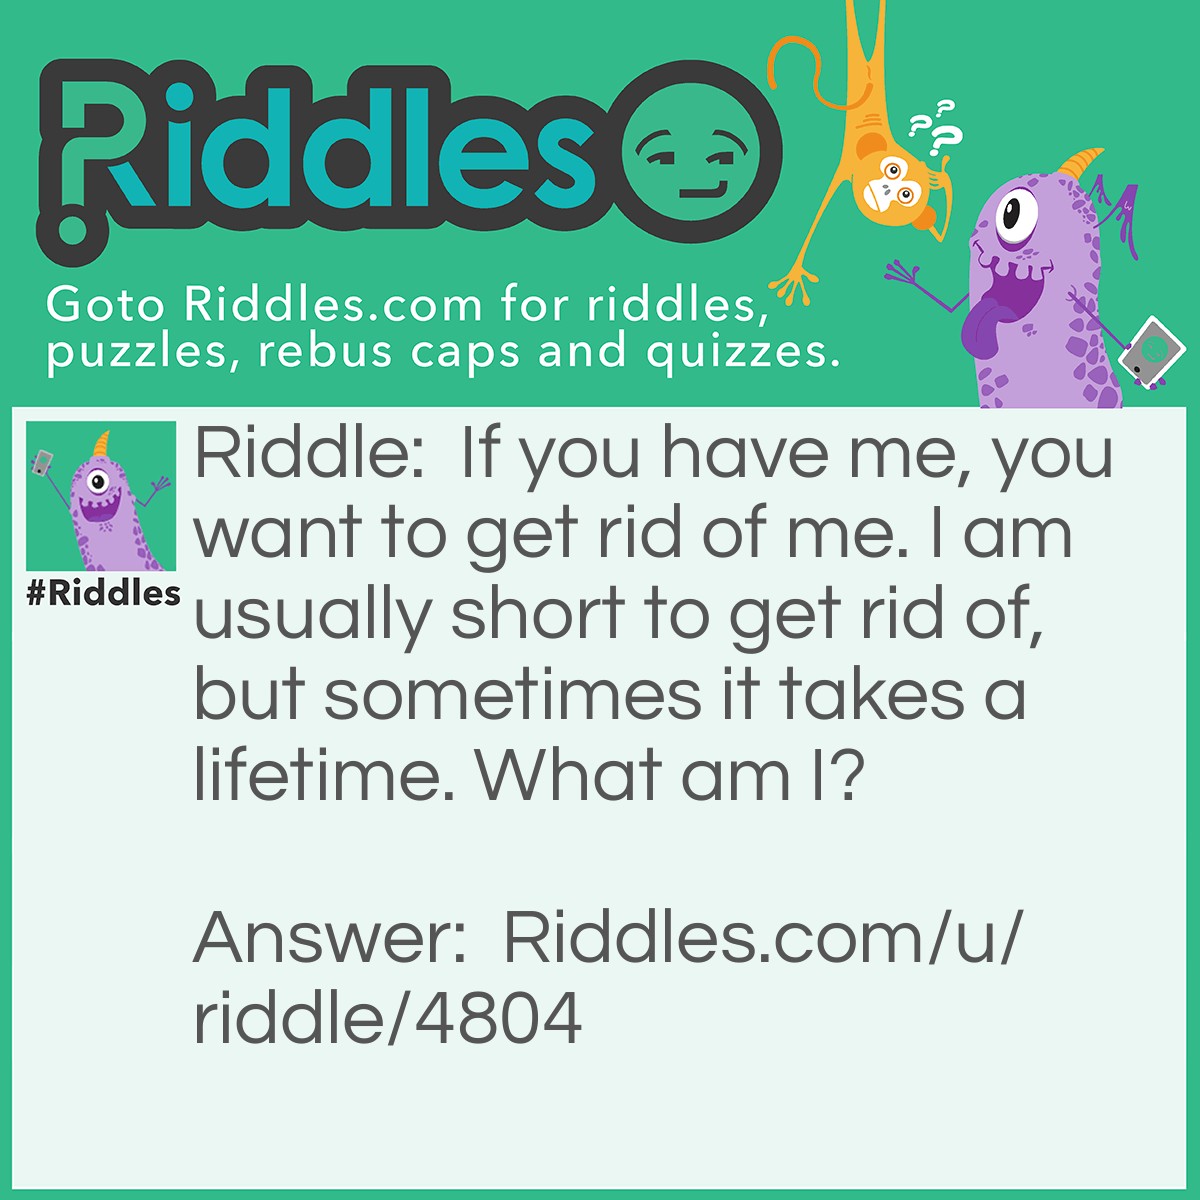 Riddle: If you have me, you want to get rid of me. I am usually short to get rid of, but sometimes it takes a lifetime. What am I? Answer: A disease.